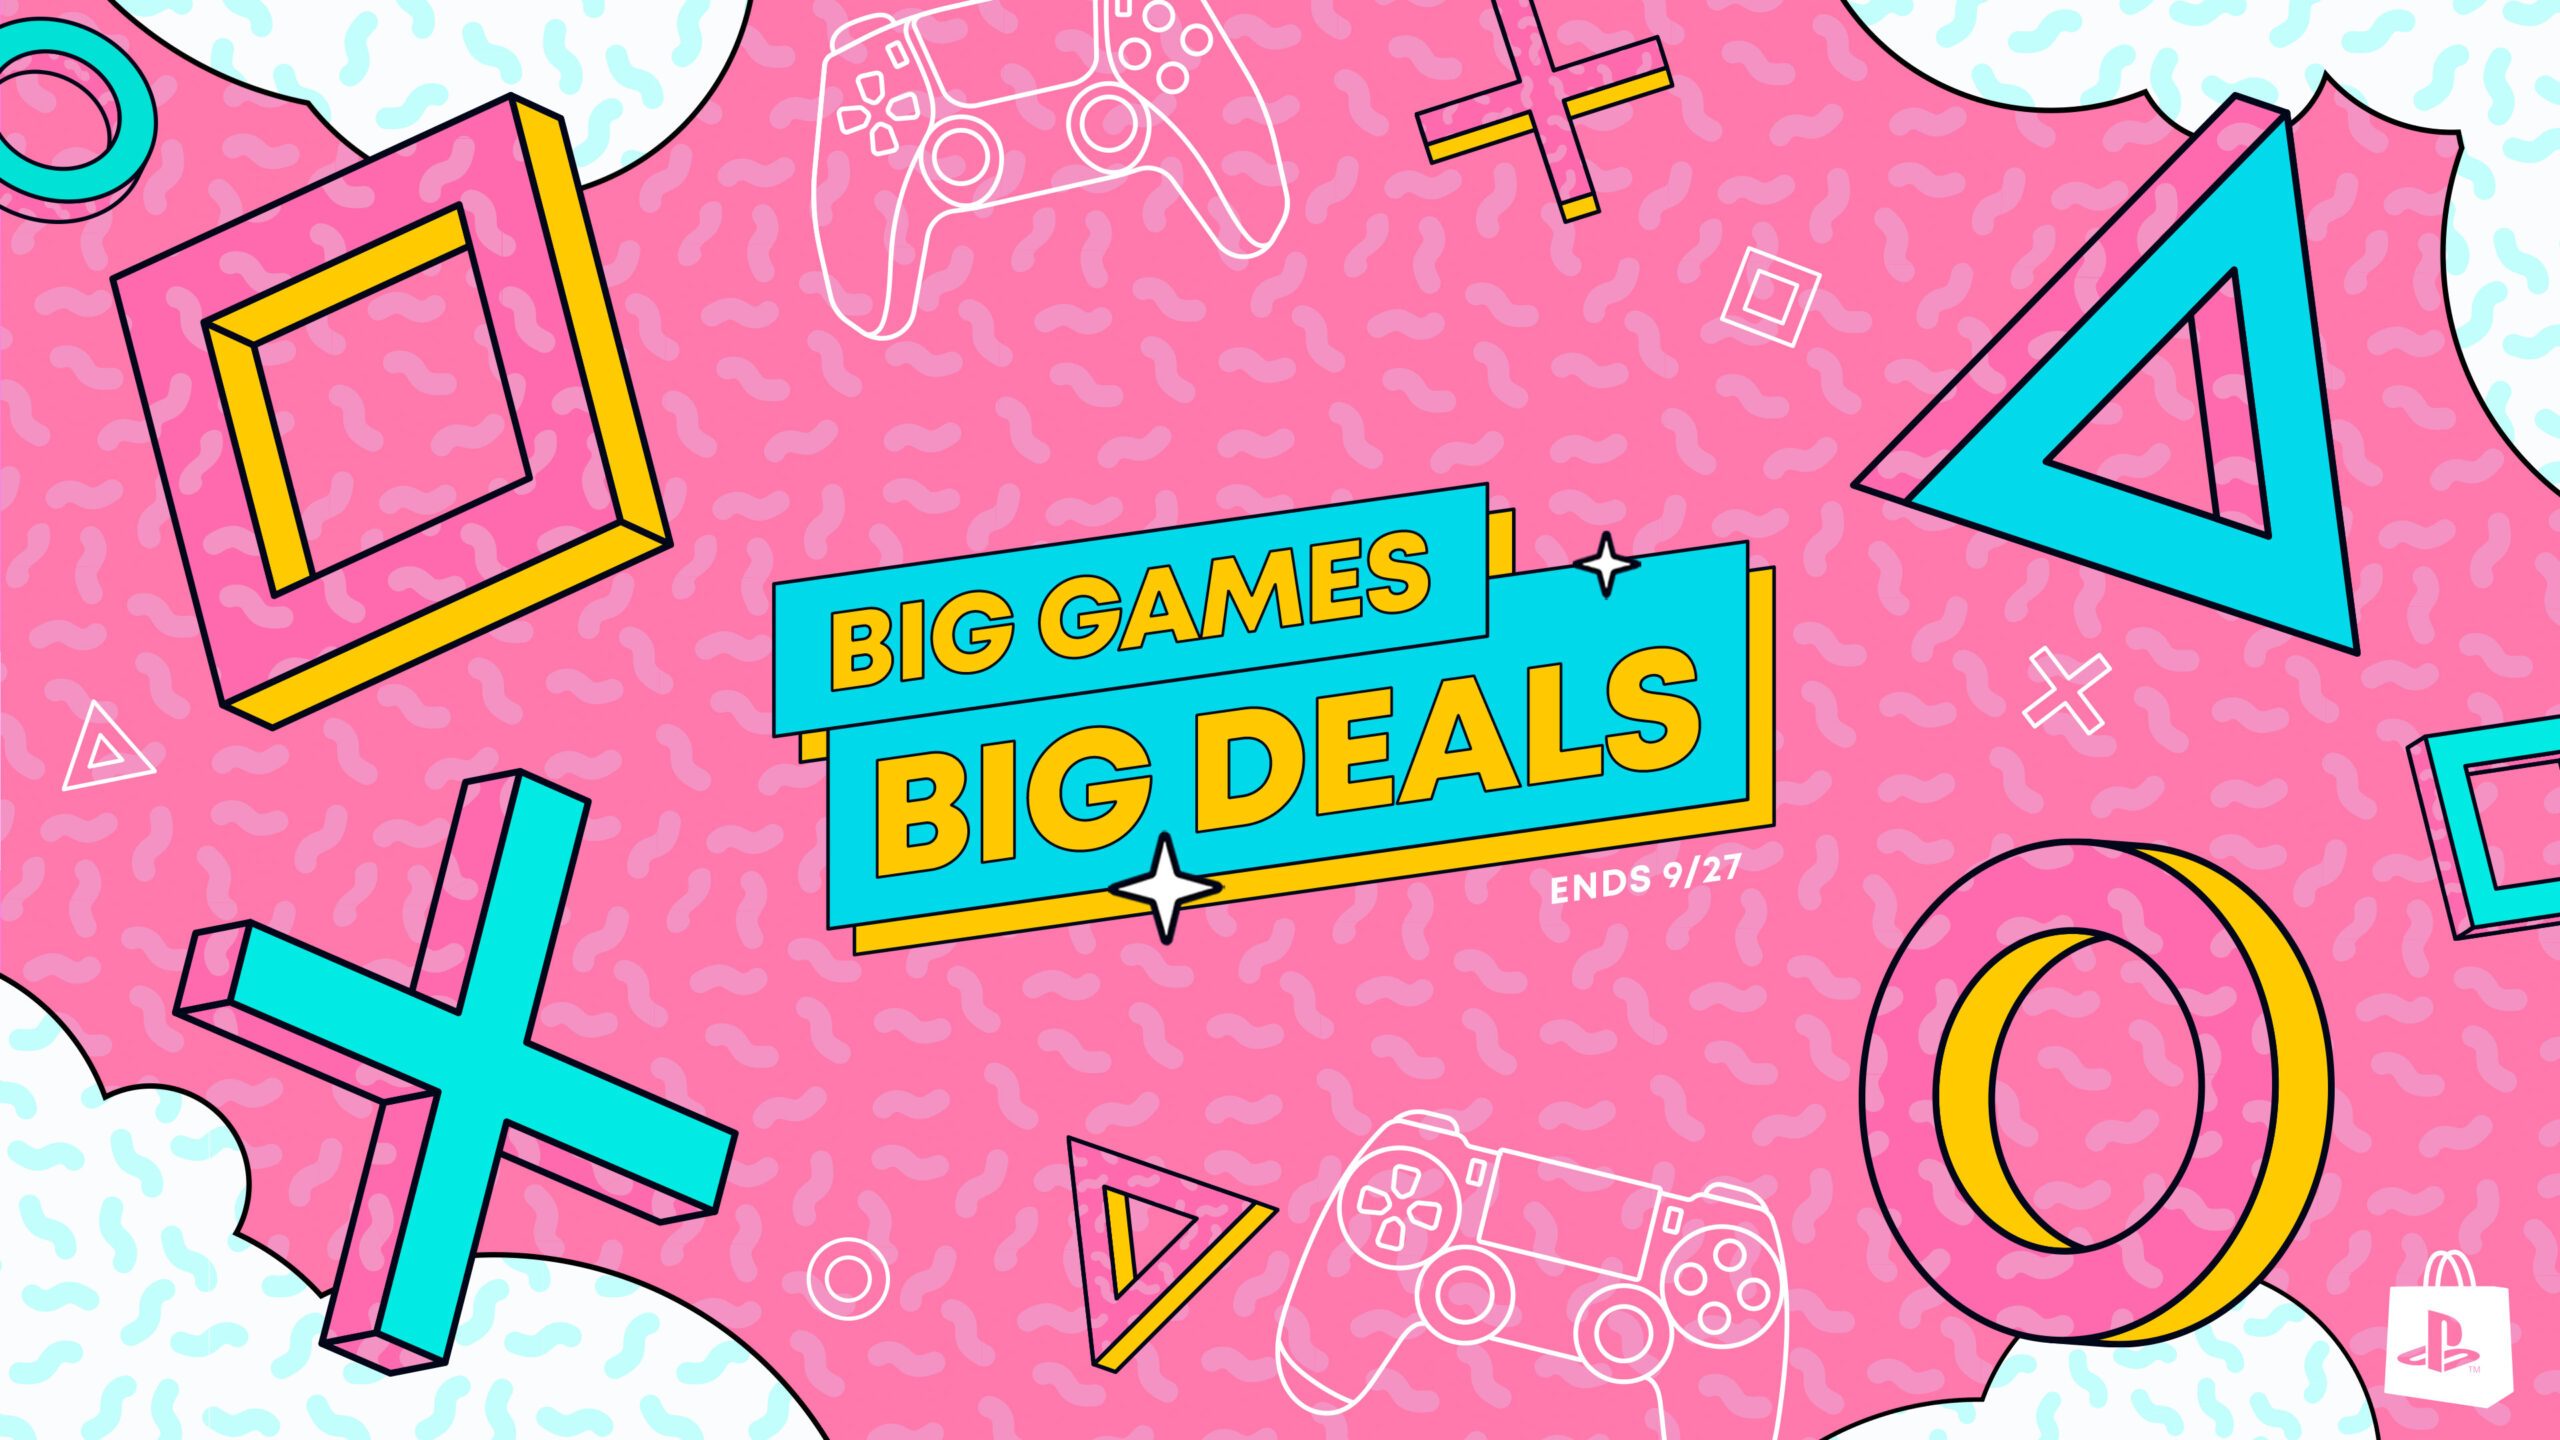 Big Games Big deals promotion comes to PlayStation Store